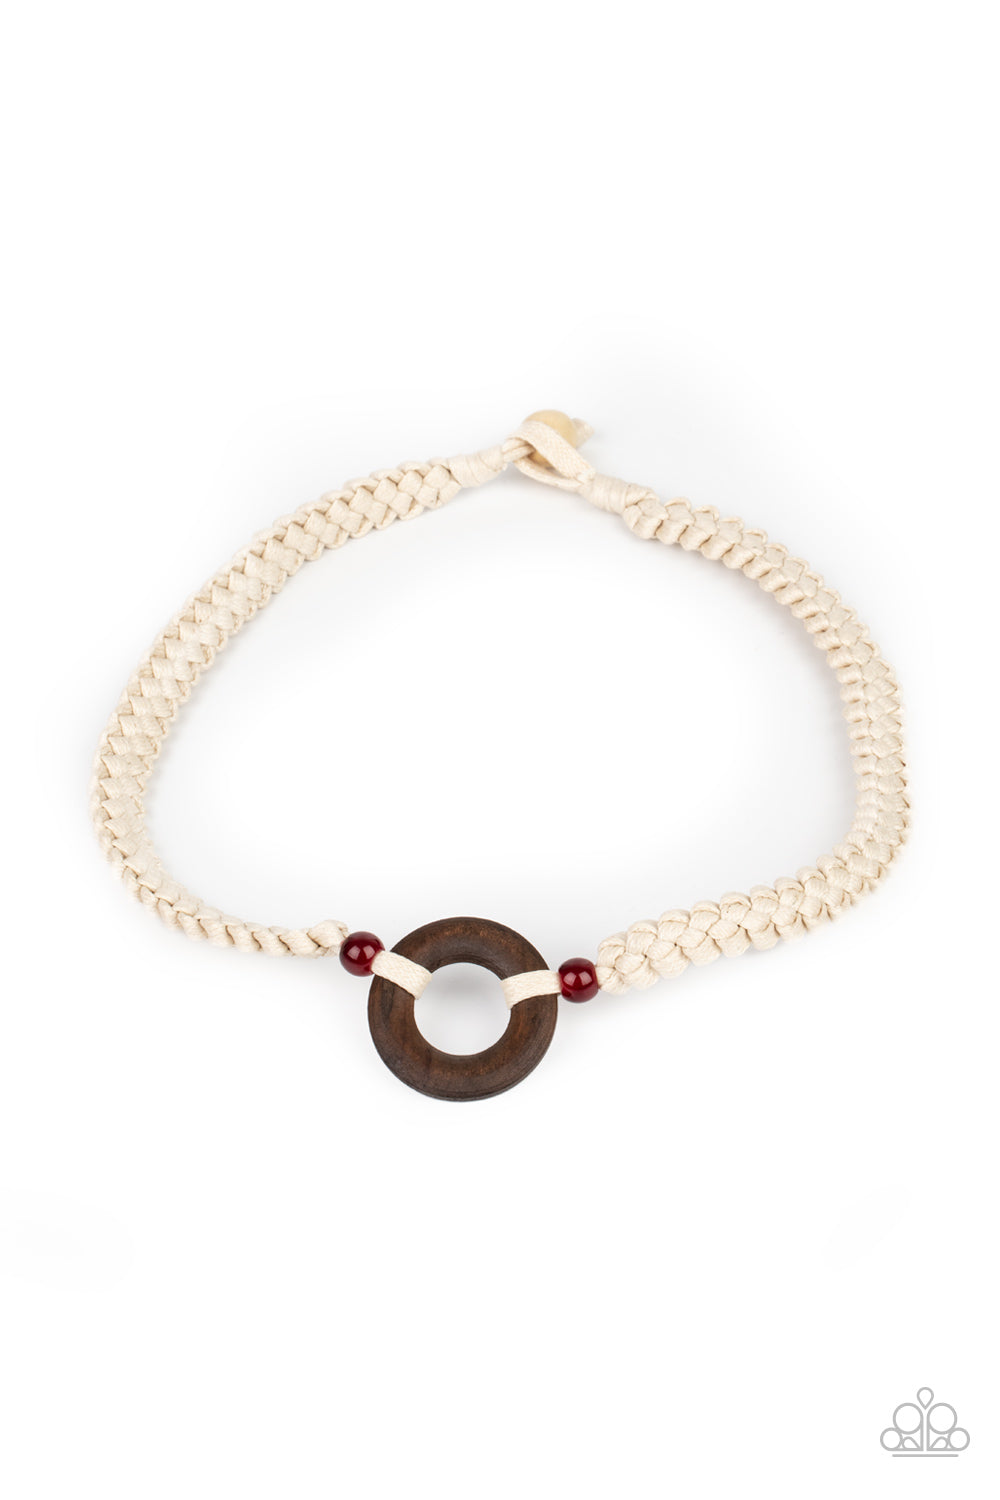 A wooden hoop is knotted in place between two glassy red beads along braided white cording around the neck for an earthy look. Features a button loop closure.